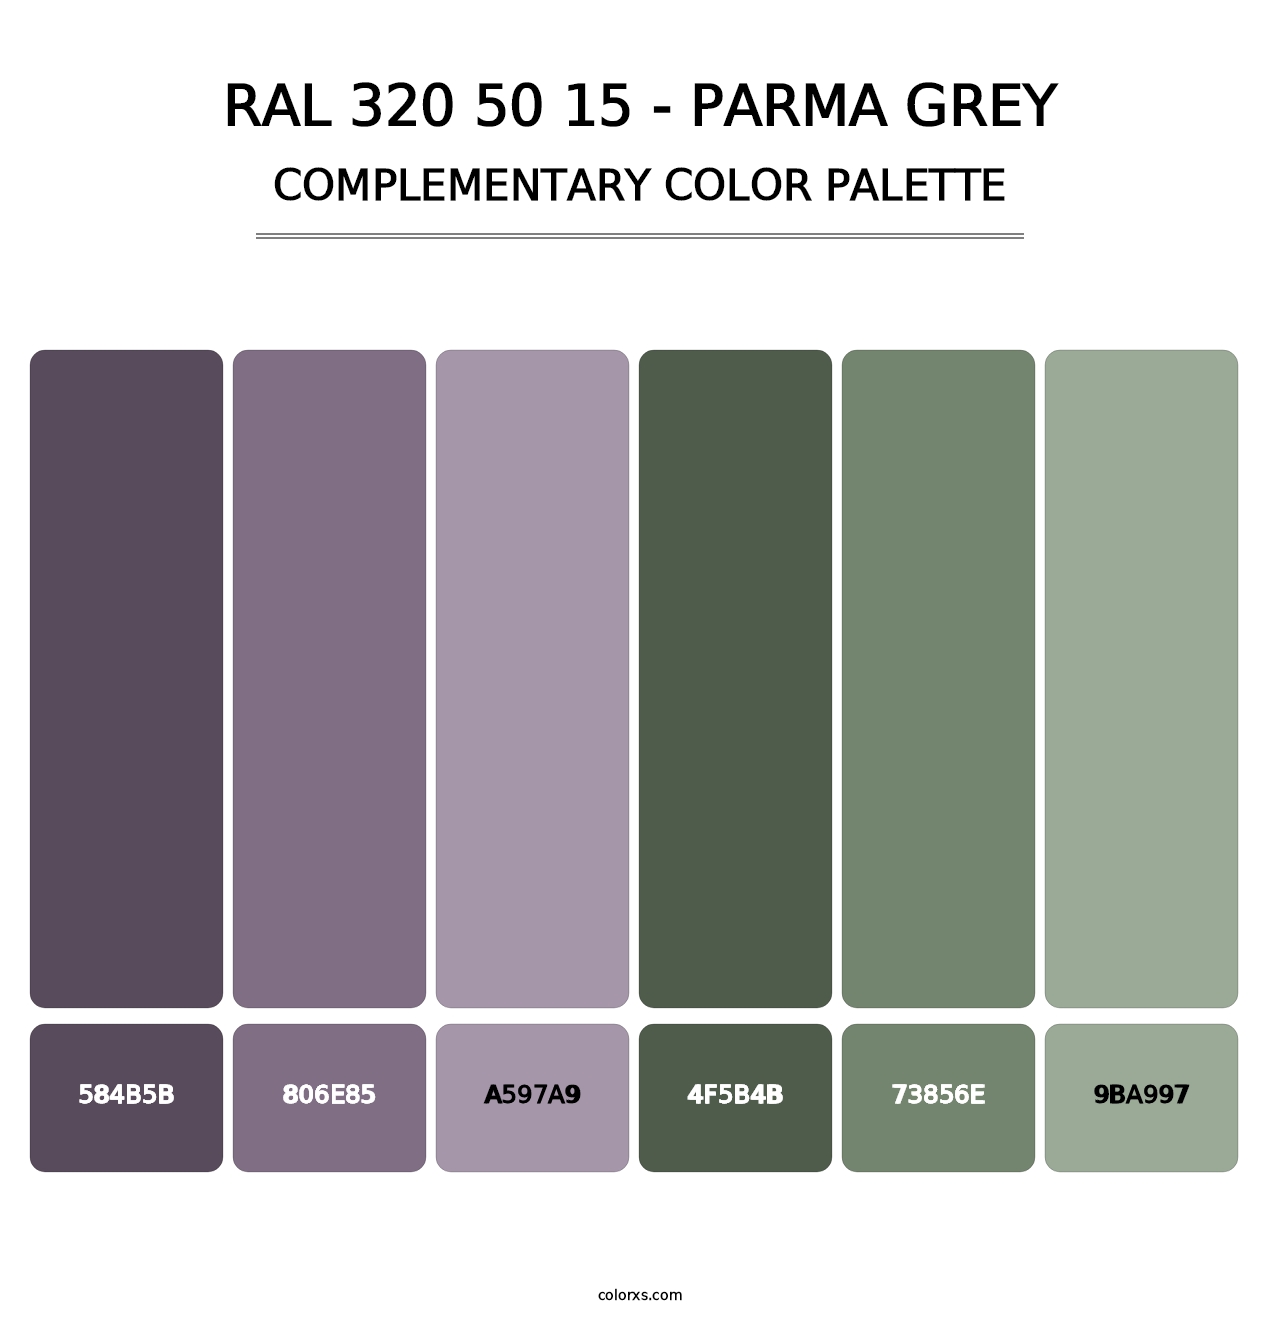 RAL 320 50 15 - Parma Grey - Complementary Color Palette